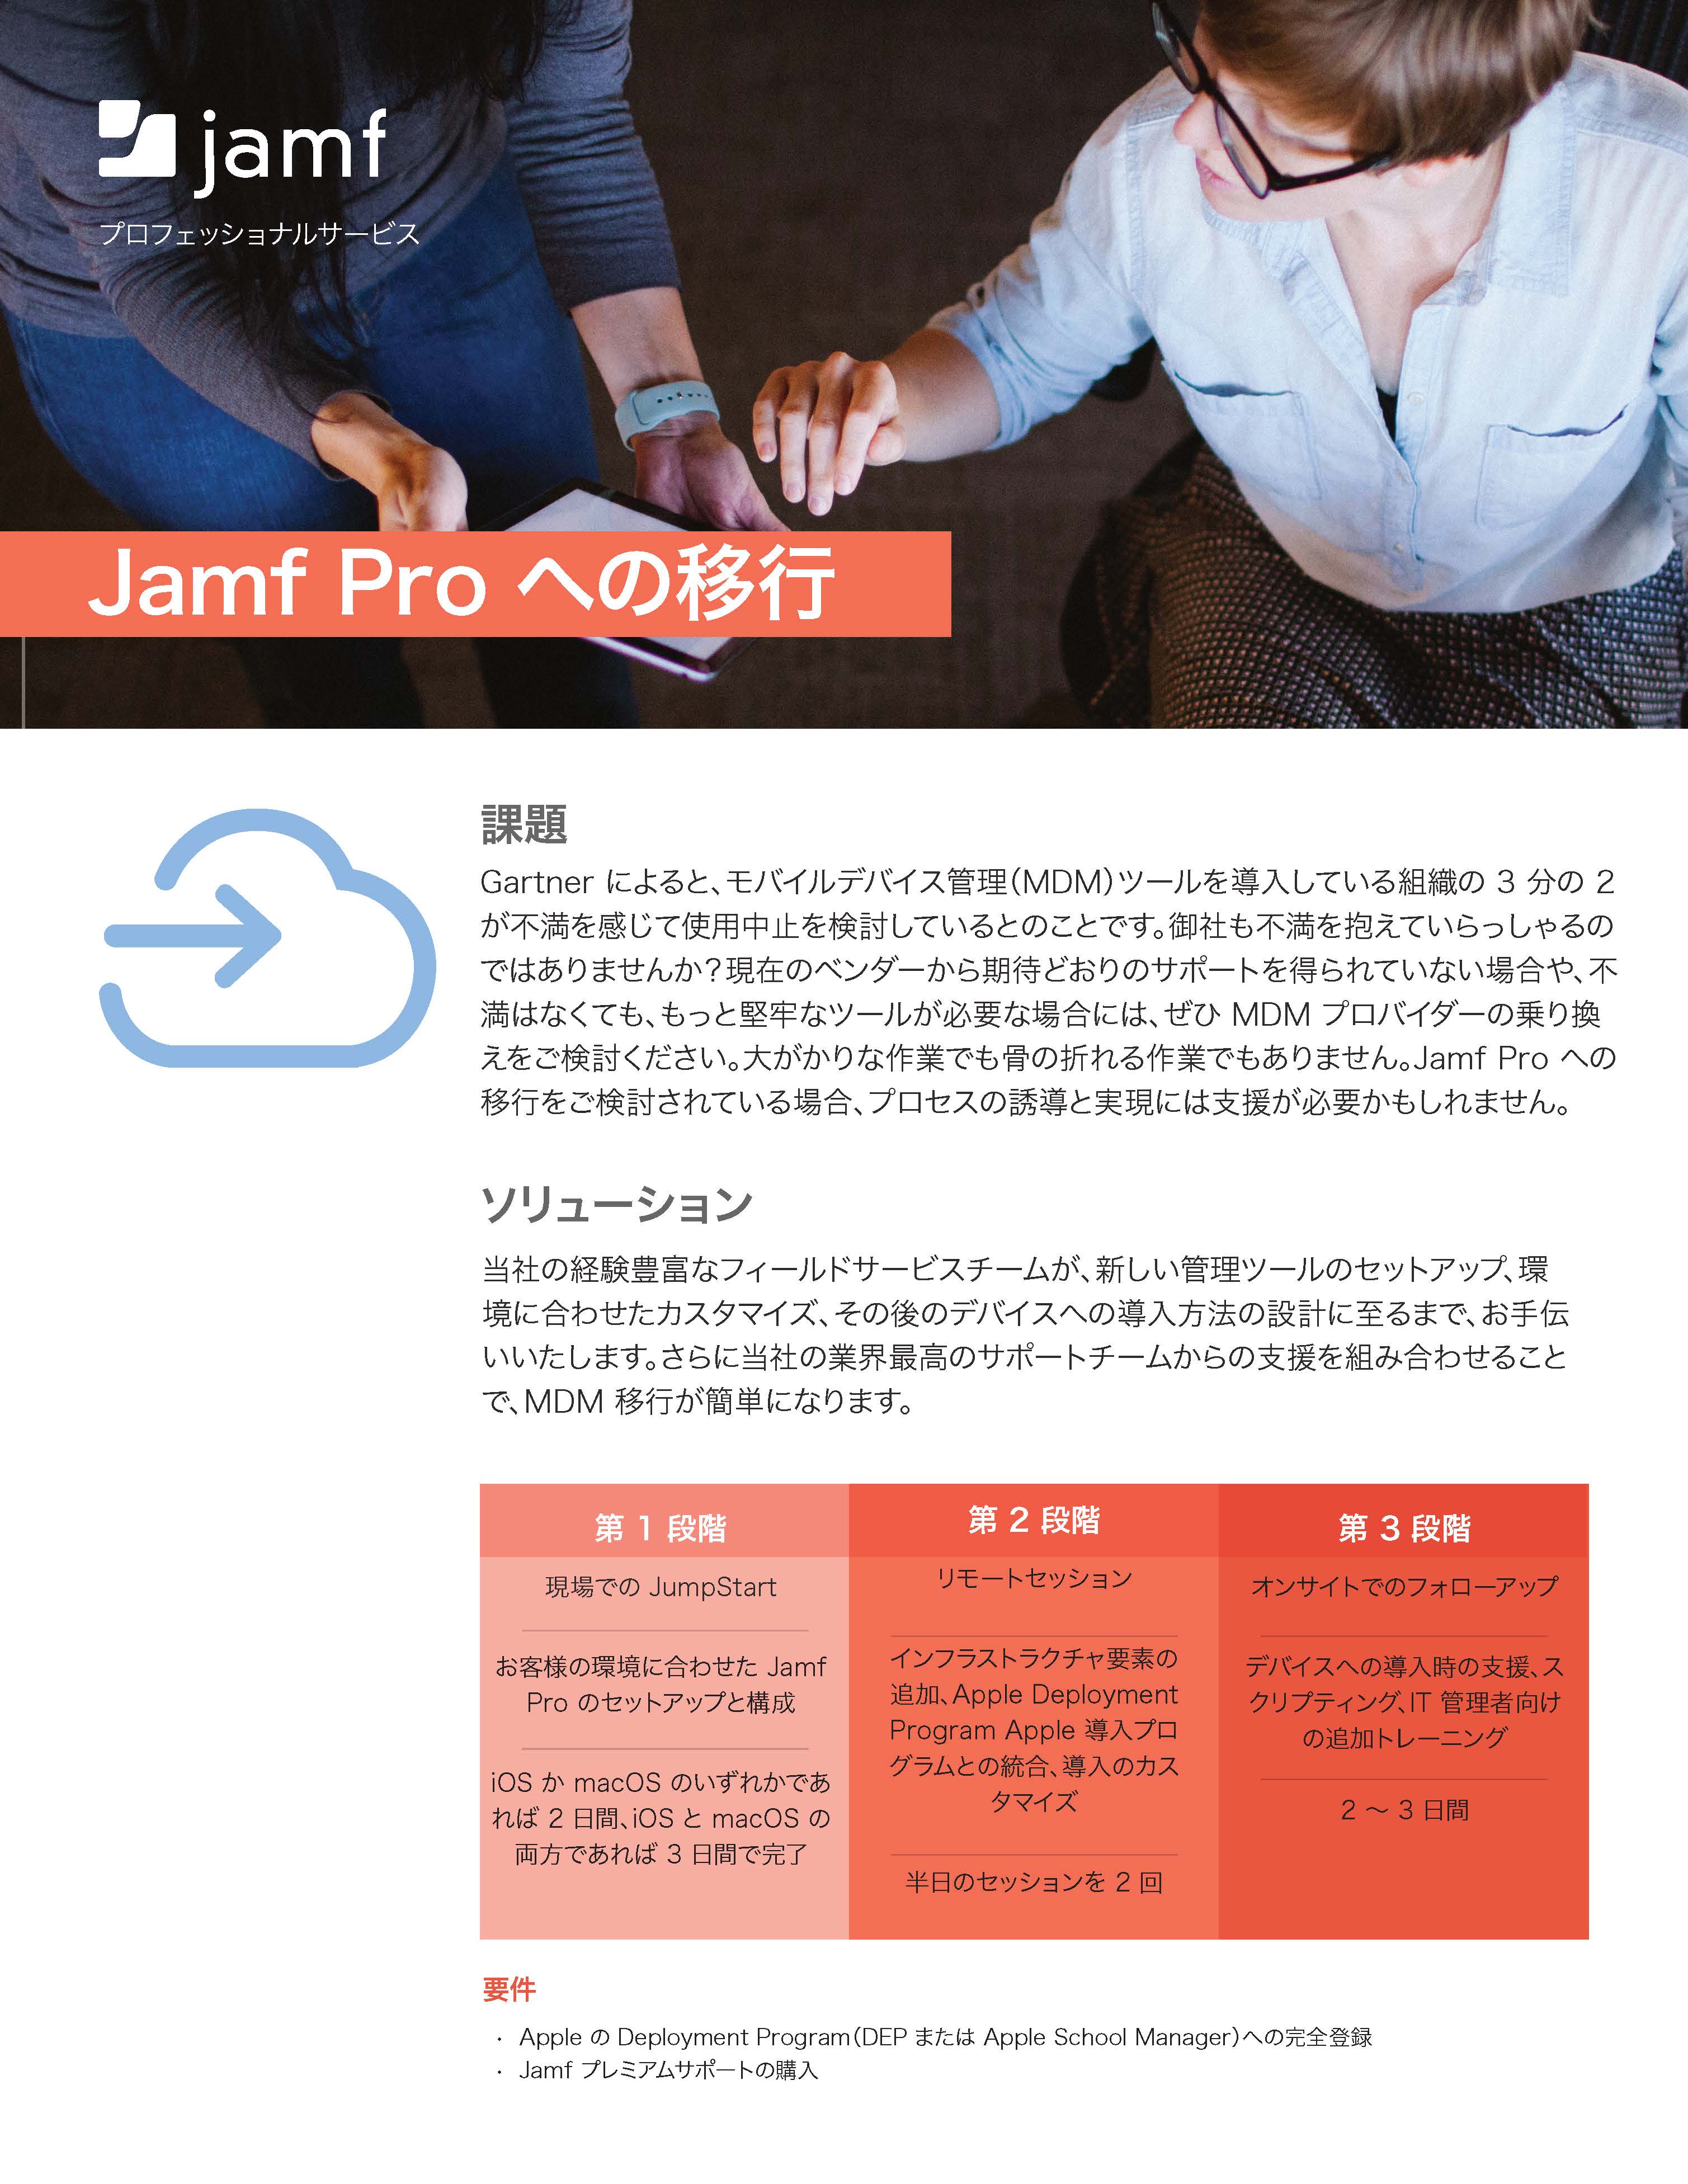 what is jamf pro used for